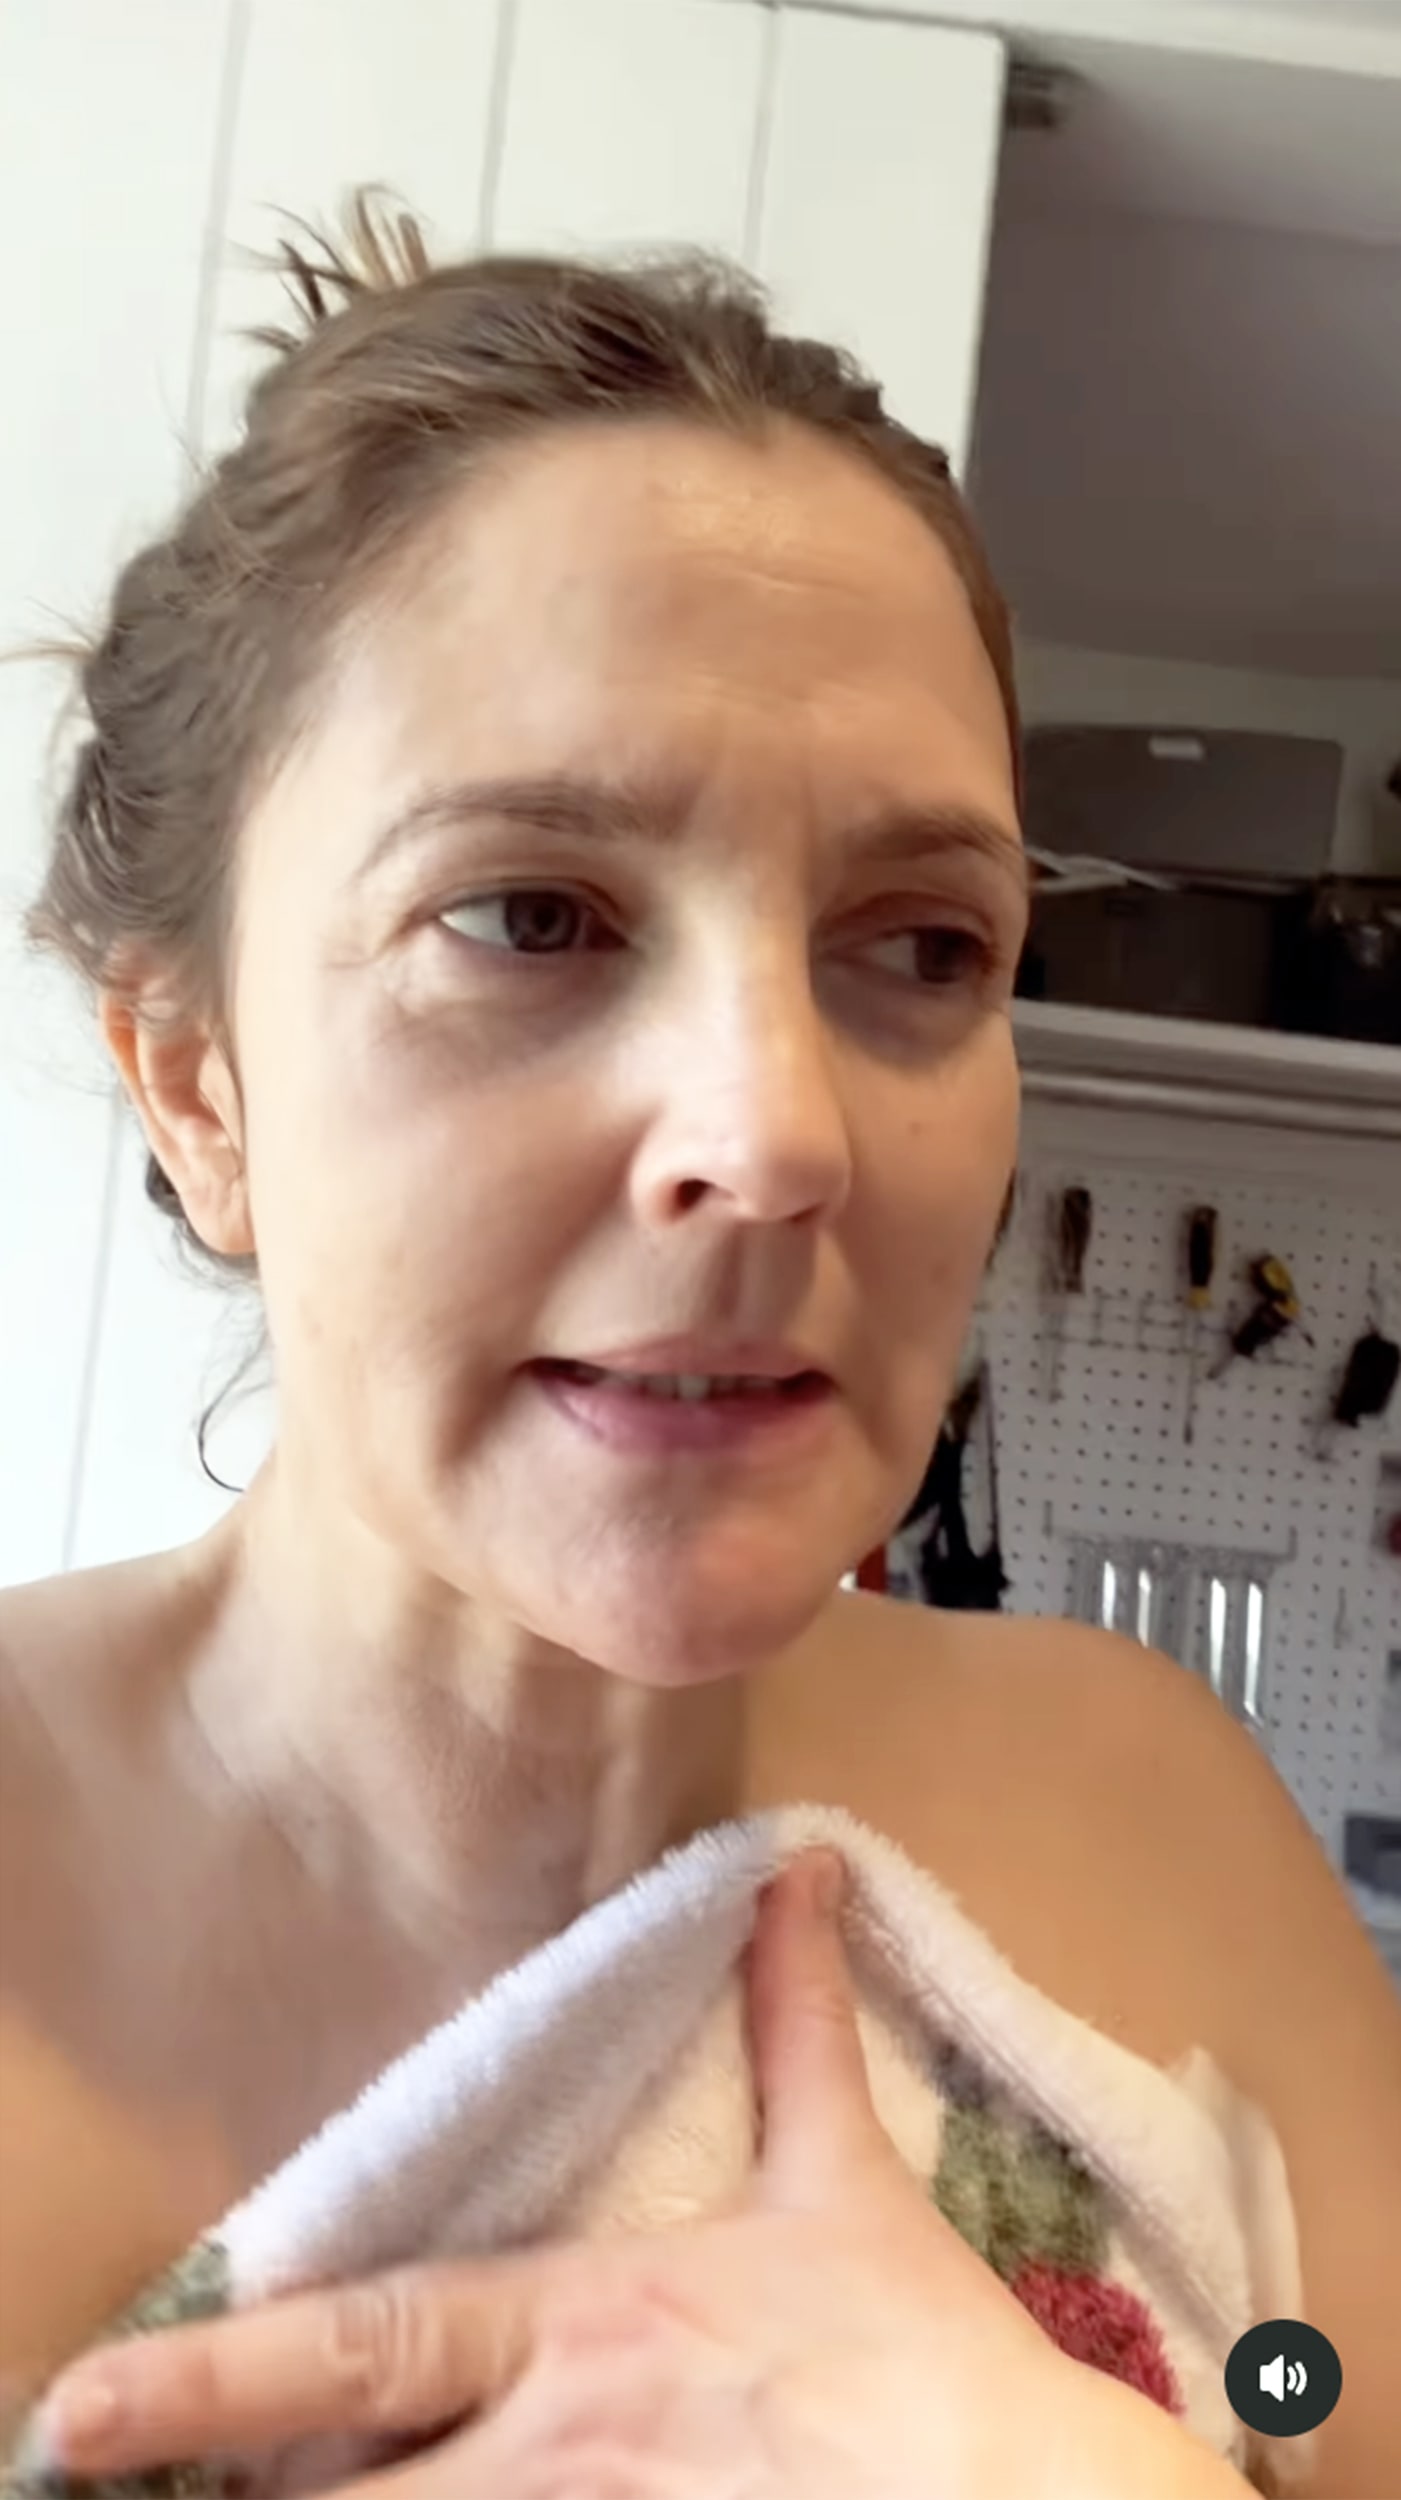 What are your thoughts on the Hand Blender from @drewbarrymore @beauti